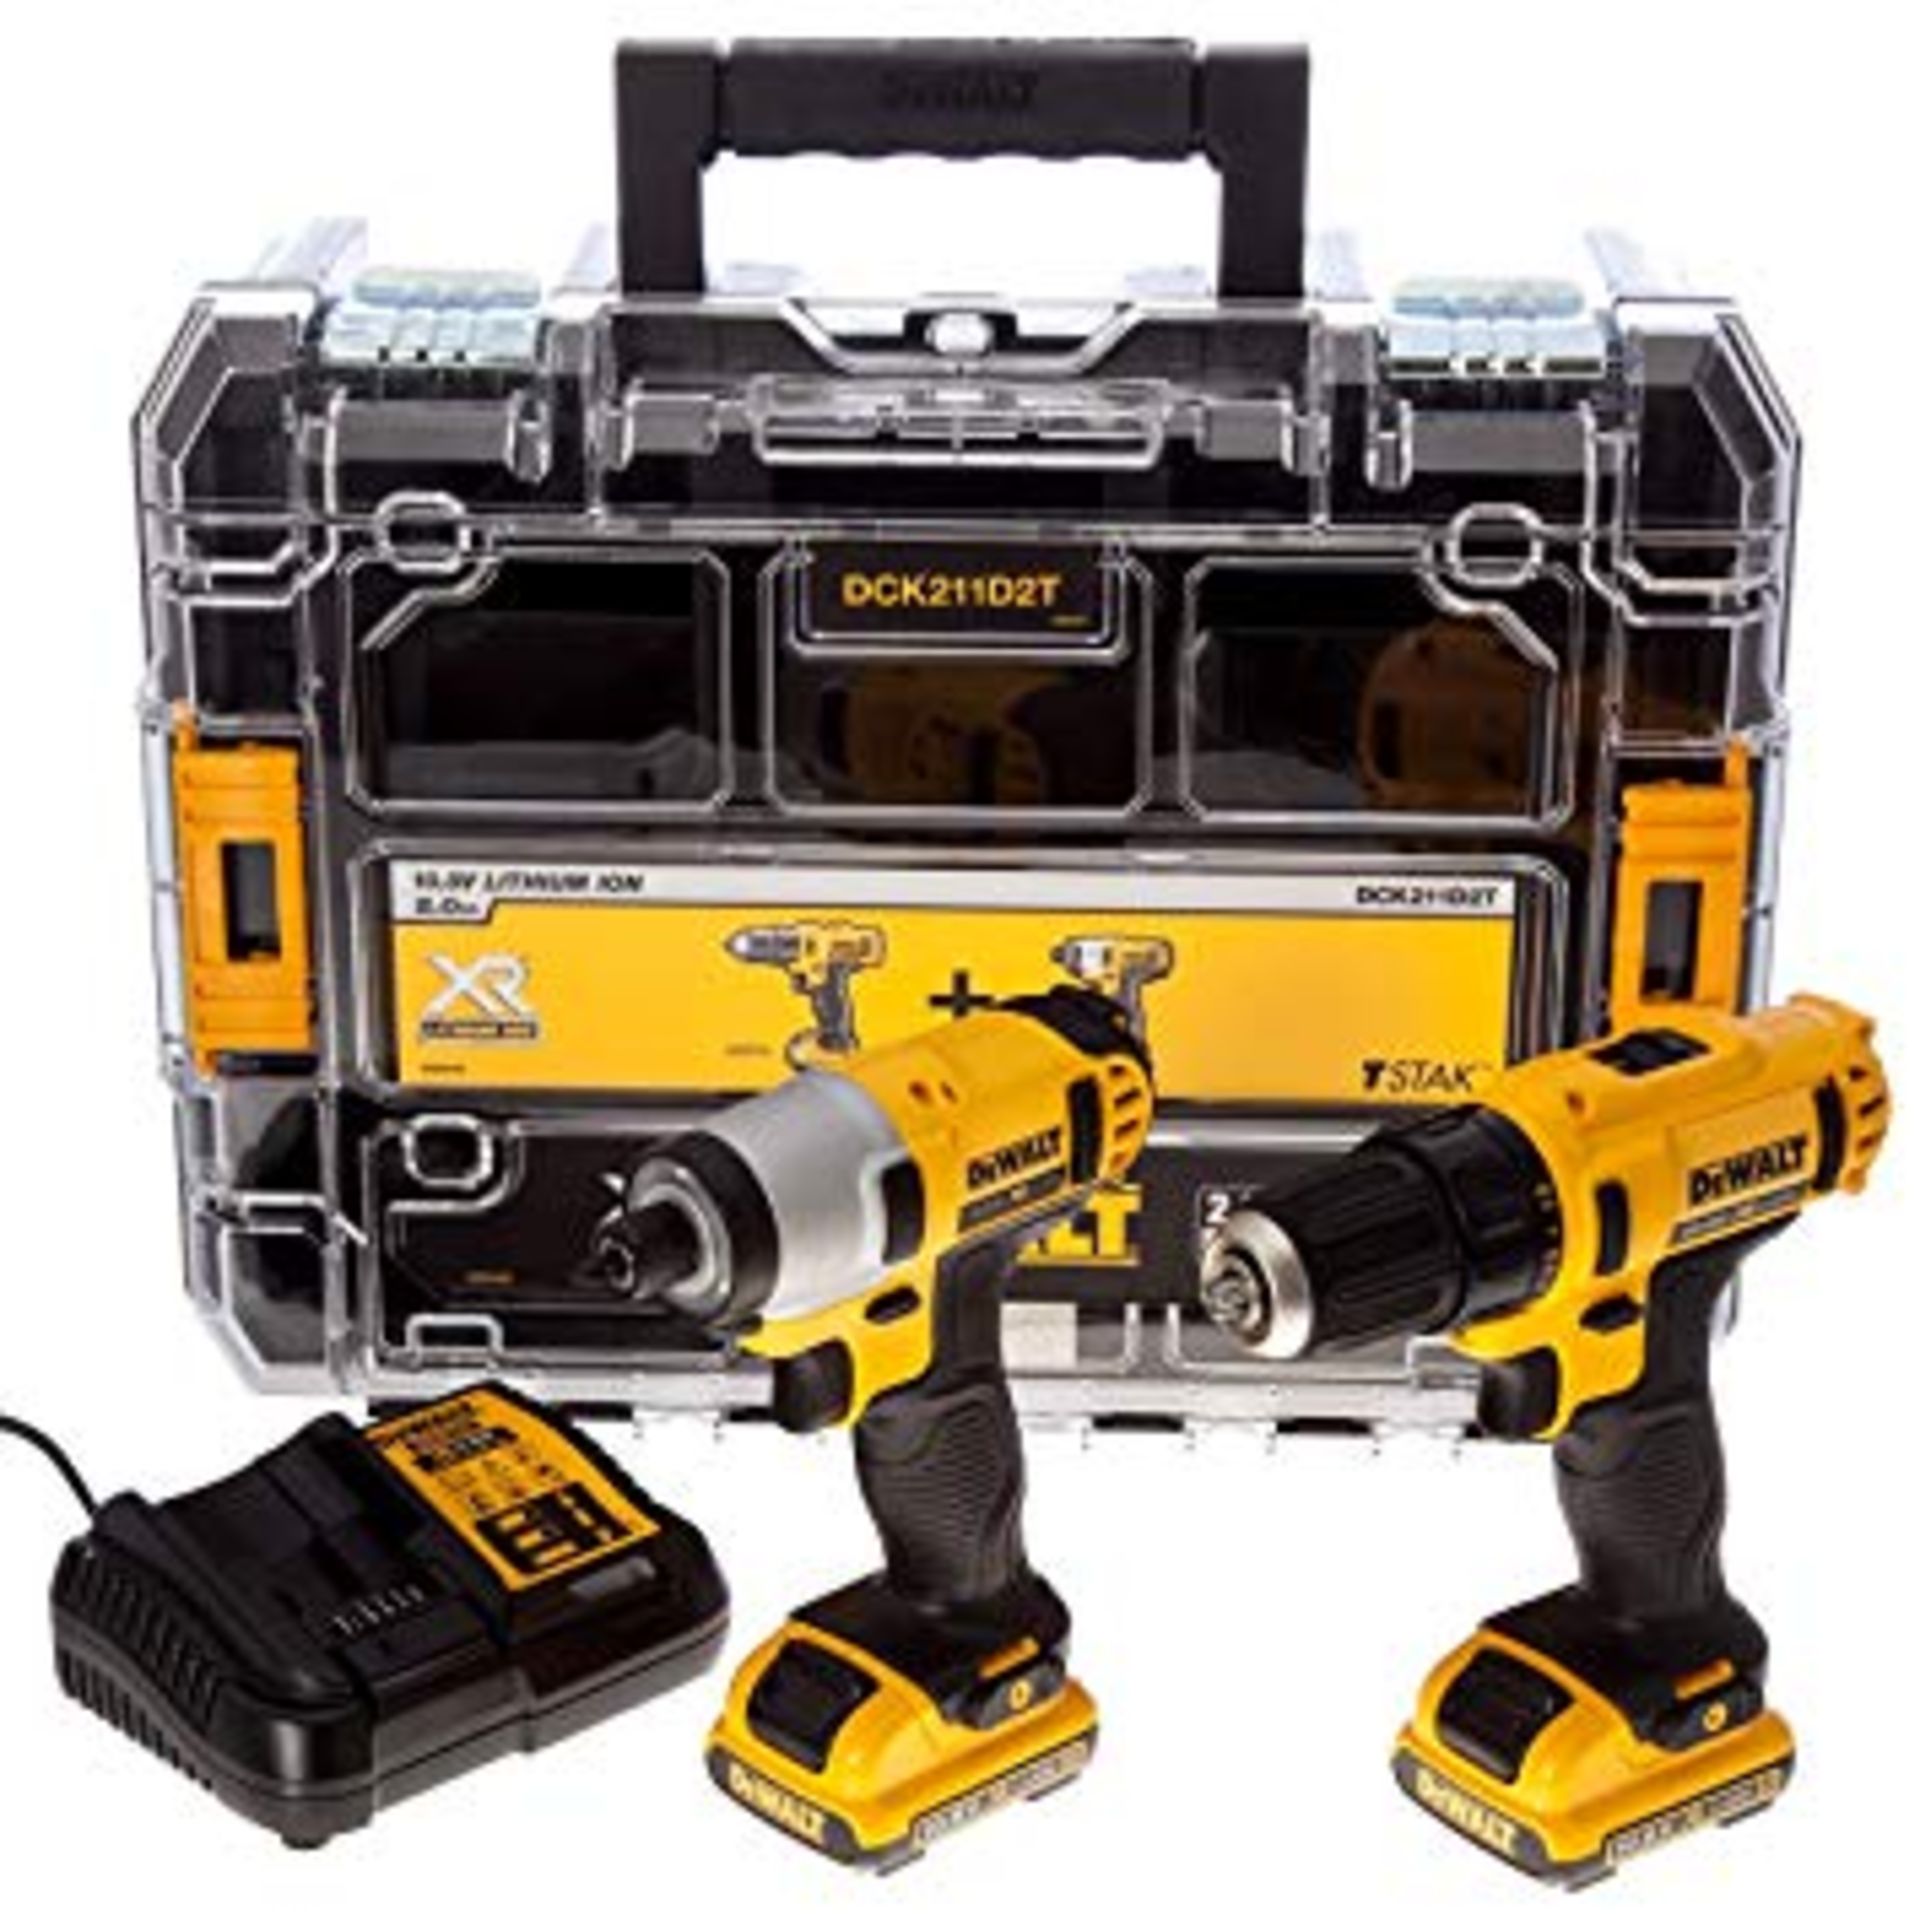 V Brand New DeWalt 10.8v Twin Drill & Impact Driver Kit + Two Batteries + Charger